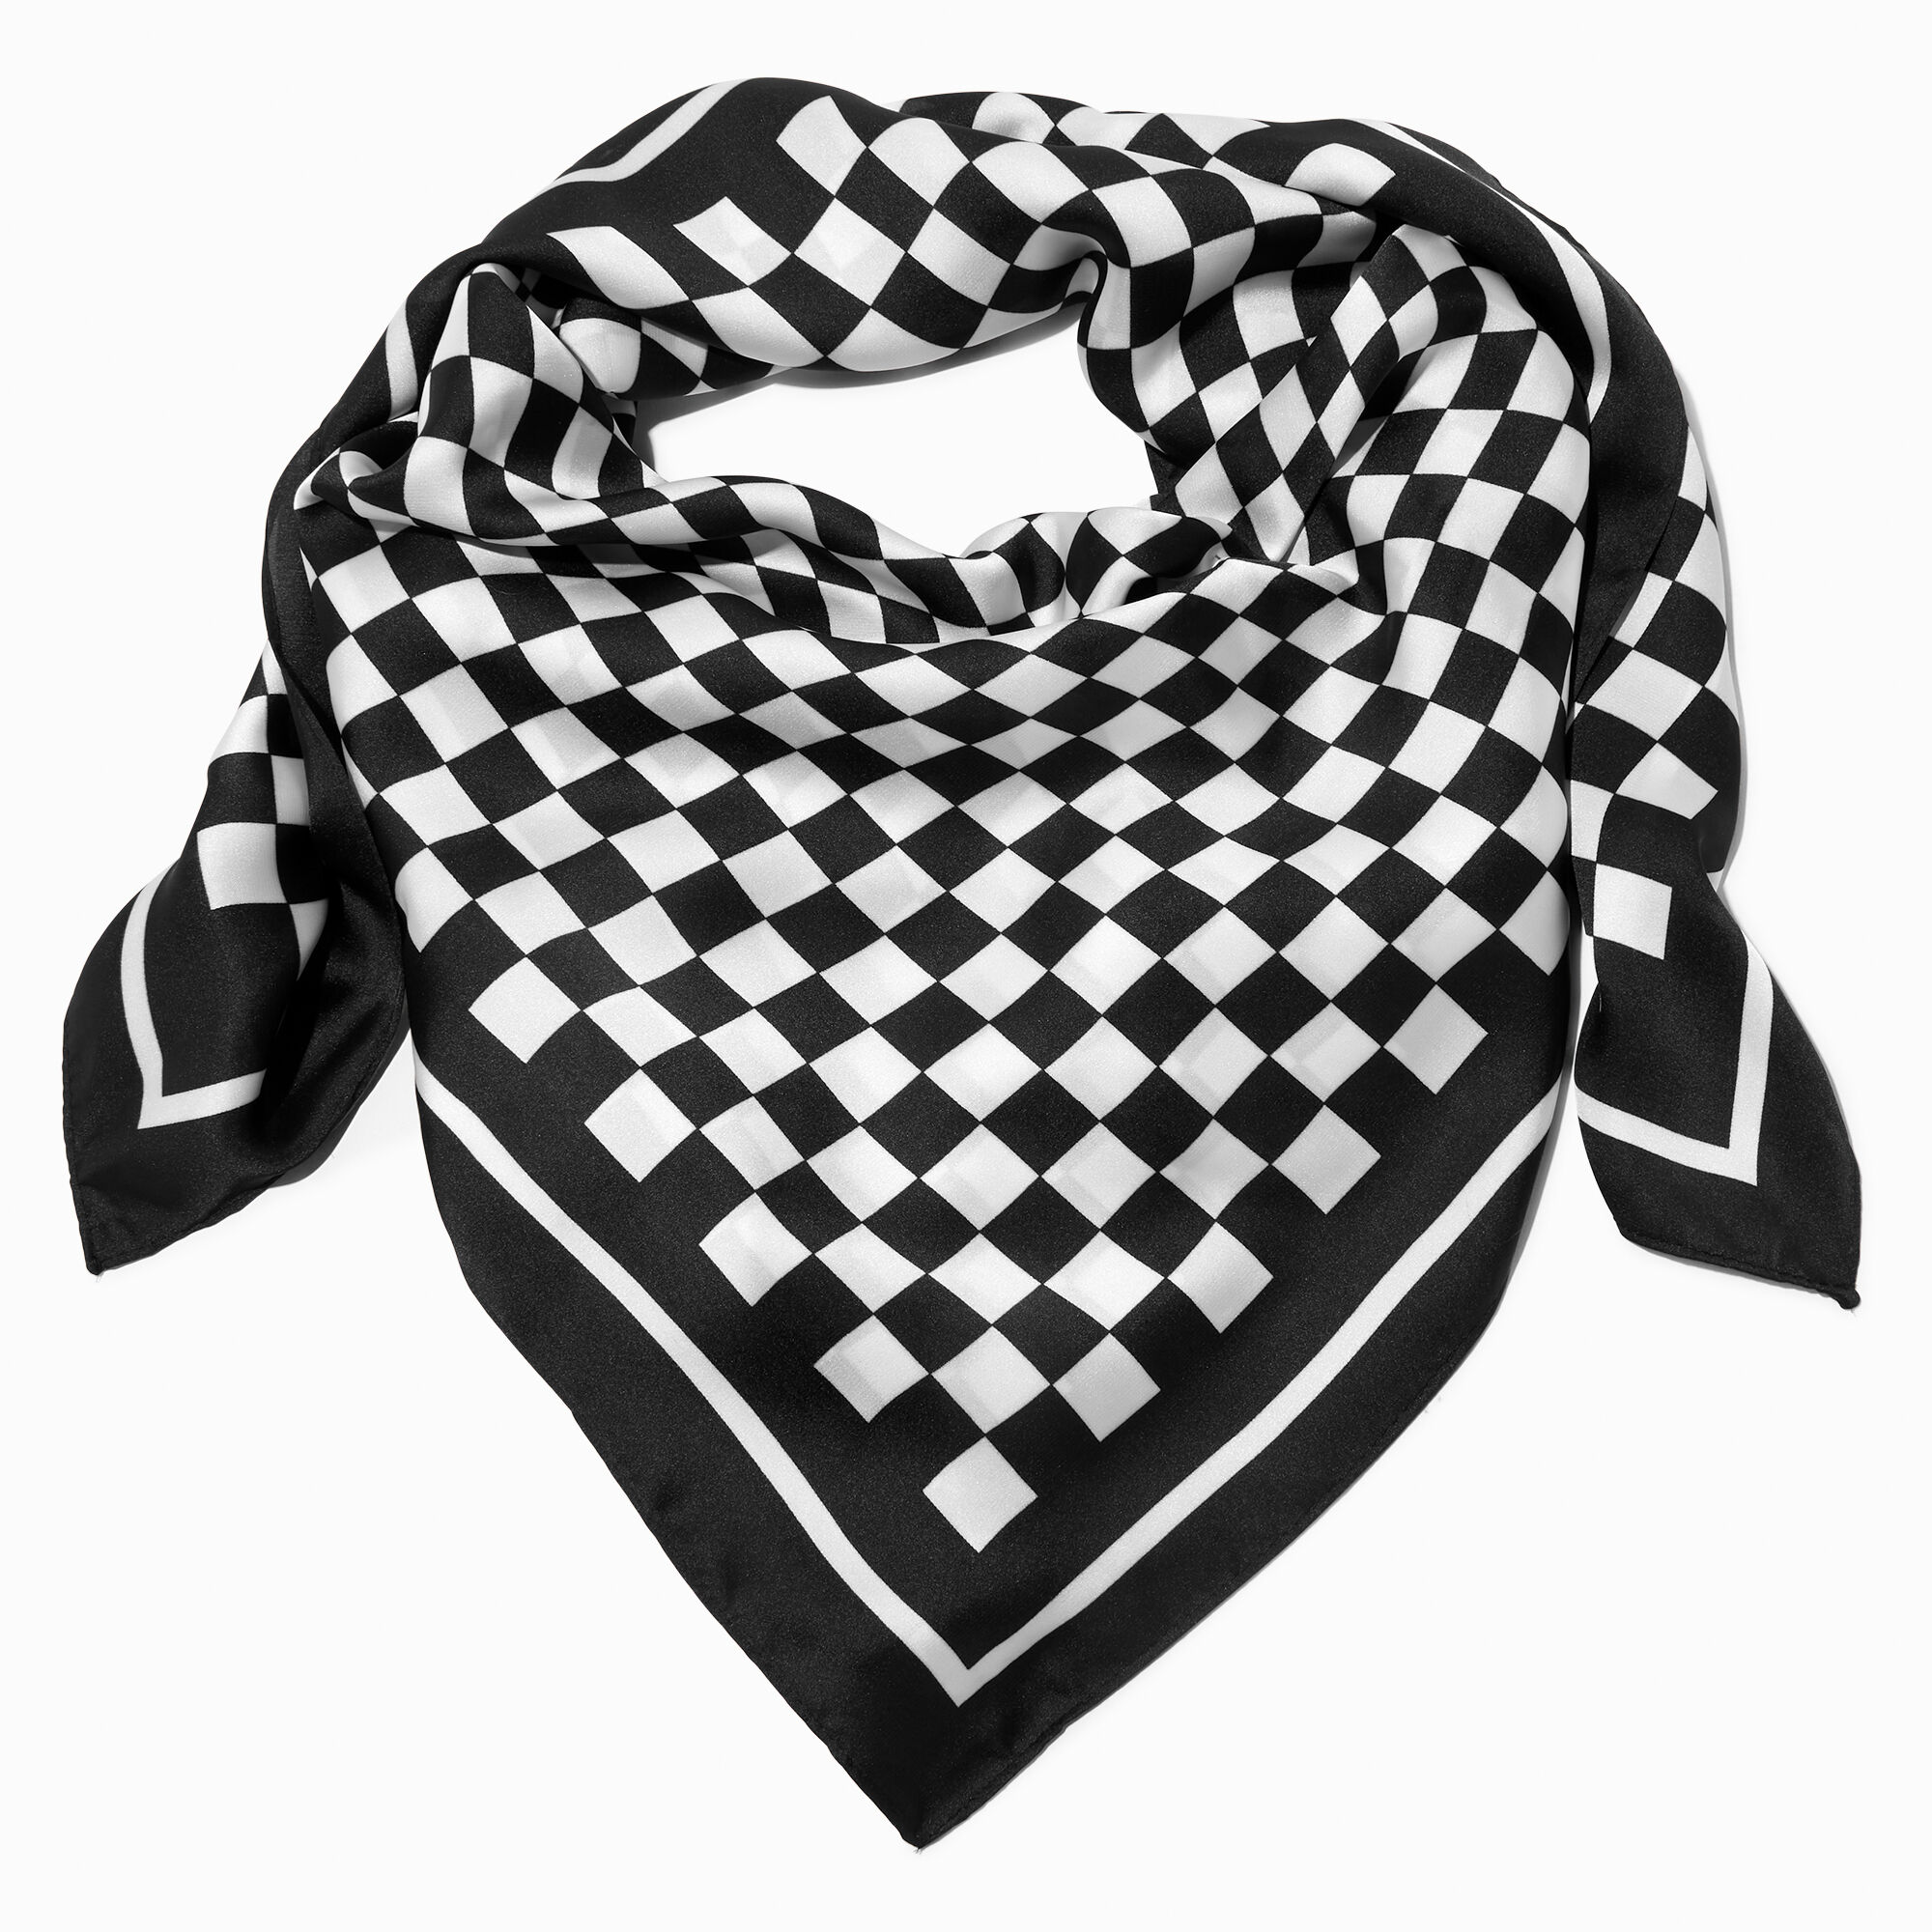 View Claires Black Checkerboard Square Scarf White information